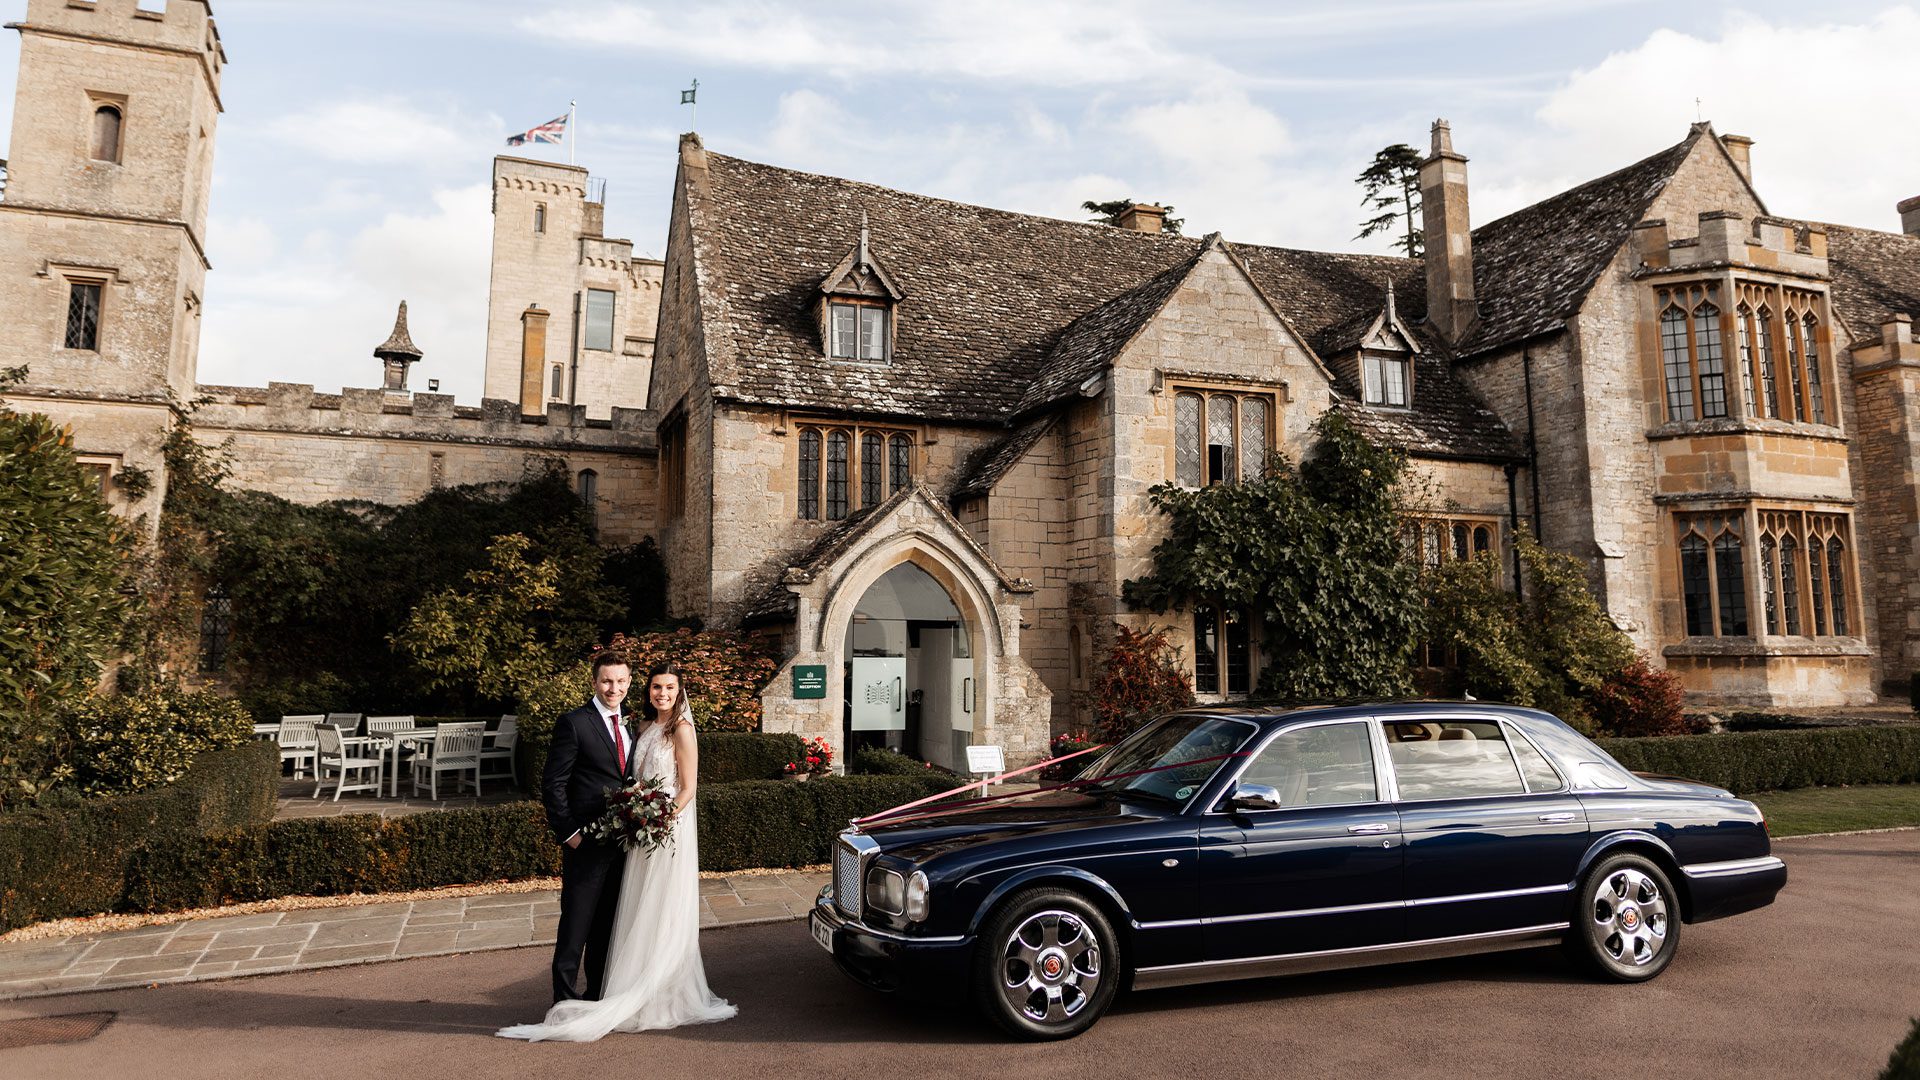 Bride and groom, Clare and Jonny, with the Bentley Arnage Wedding Car at Ellenbourgh Park Hotel